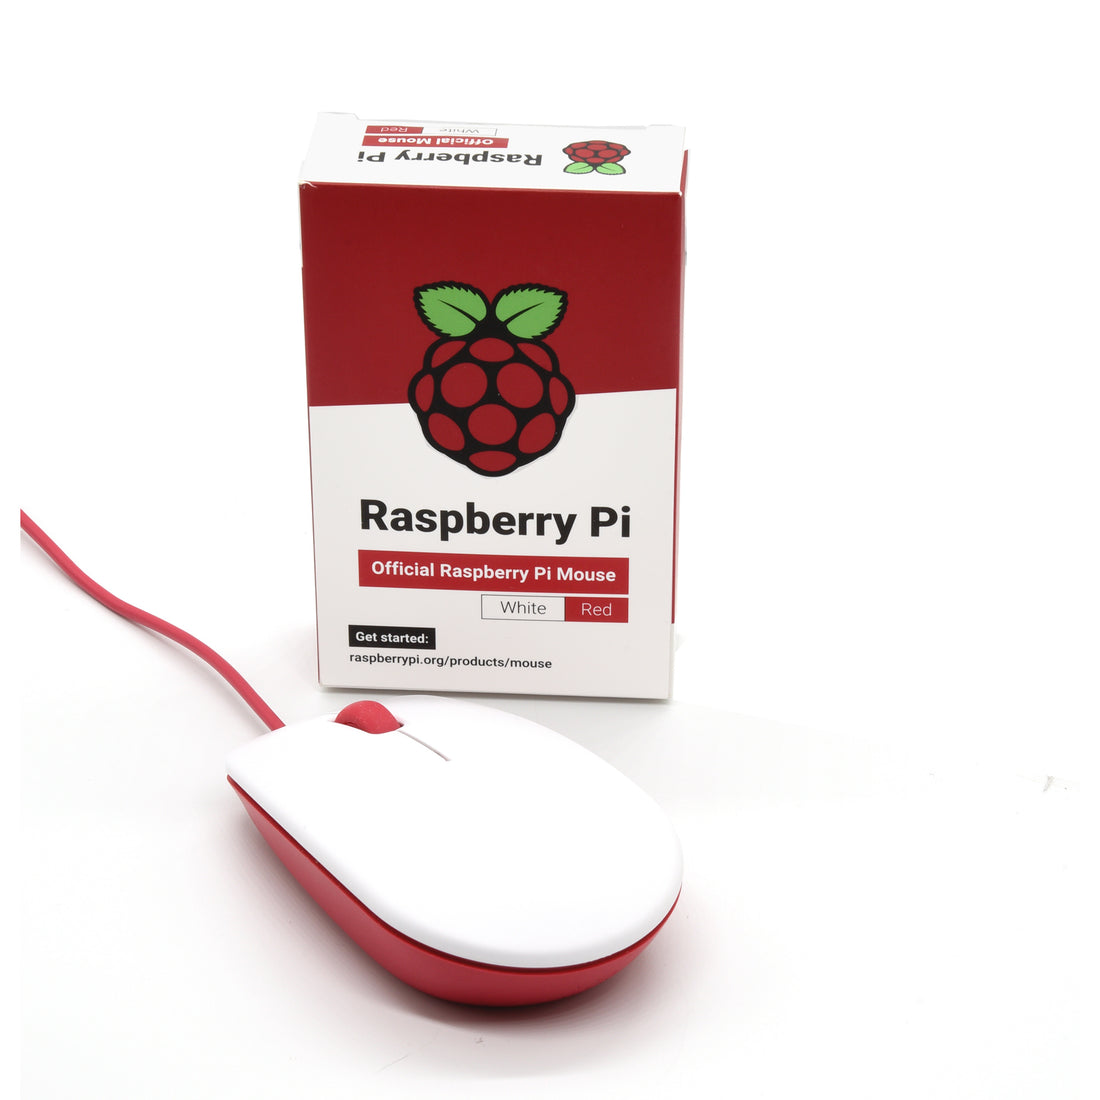 PepperTech Digital Raspberry Pi 400 Desktop Computer Complete Value Pack (U.S. Layout – Red / White with 32GB SD Card - Raspberry Pi OS Preloaded)